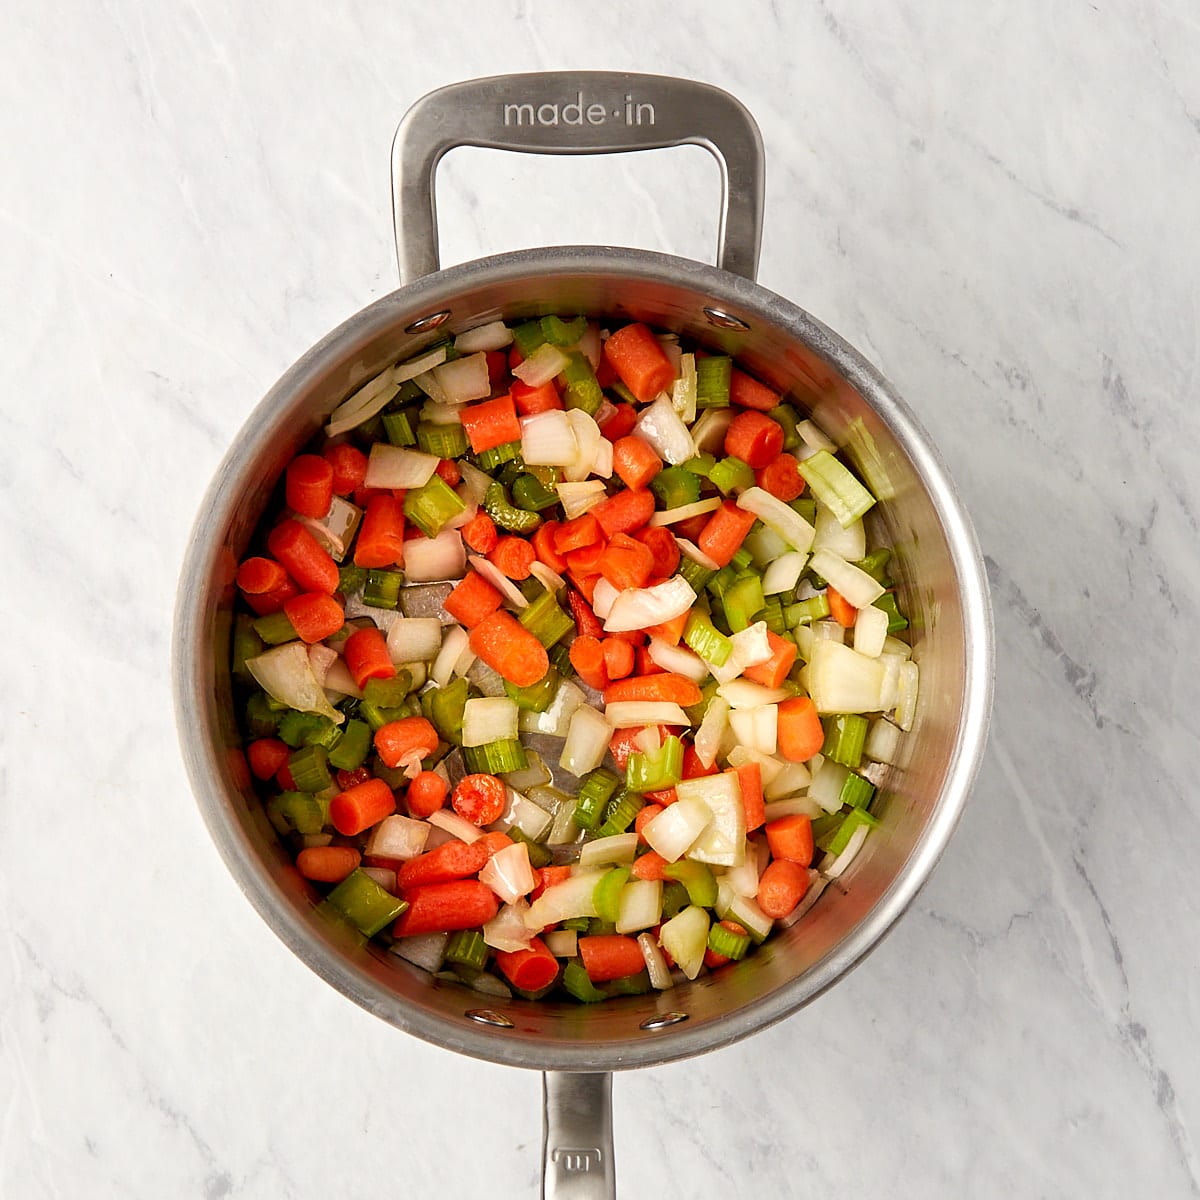 the mirepoix of carrots, celery, and onions cooking in a saucepan.